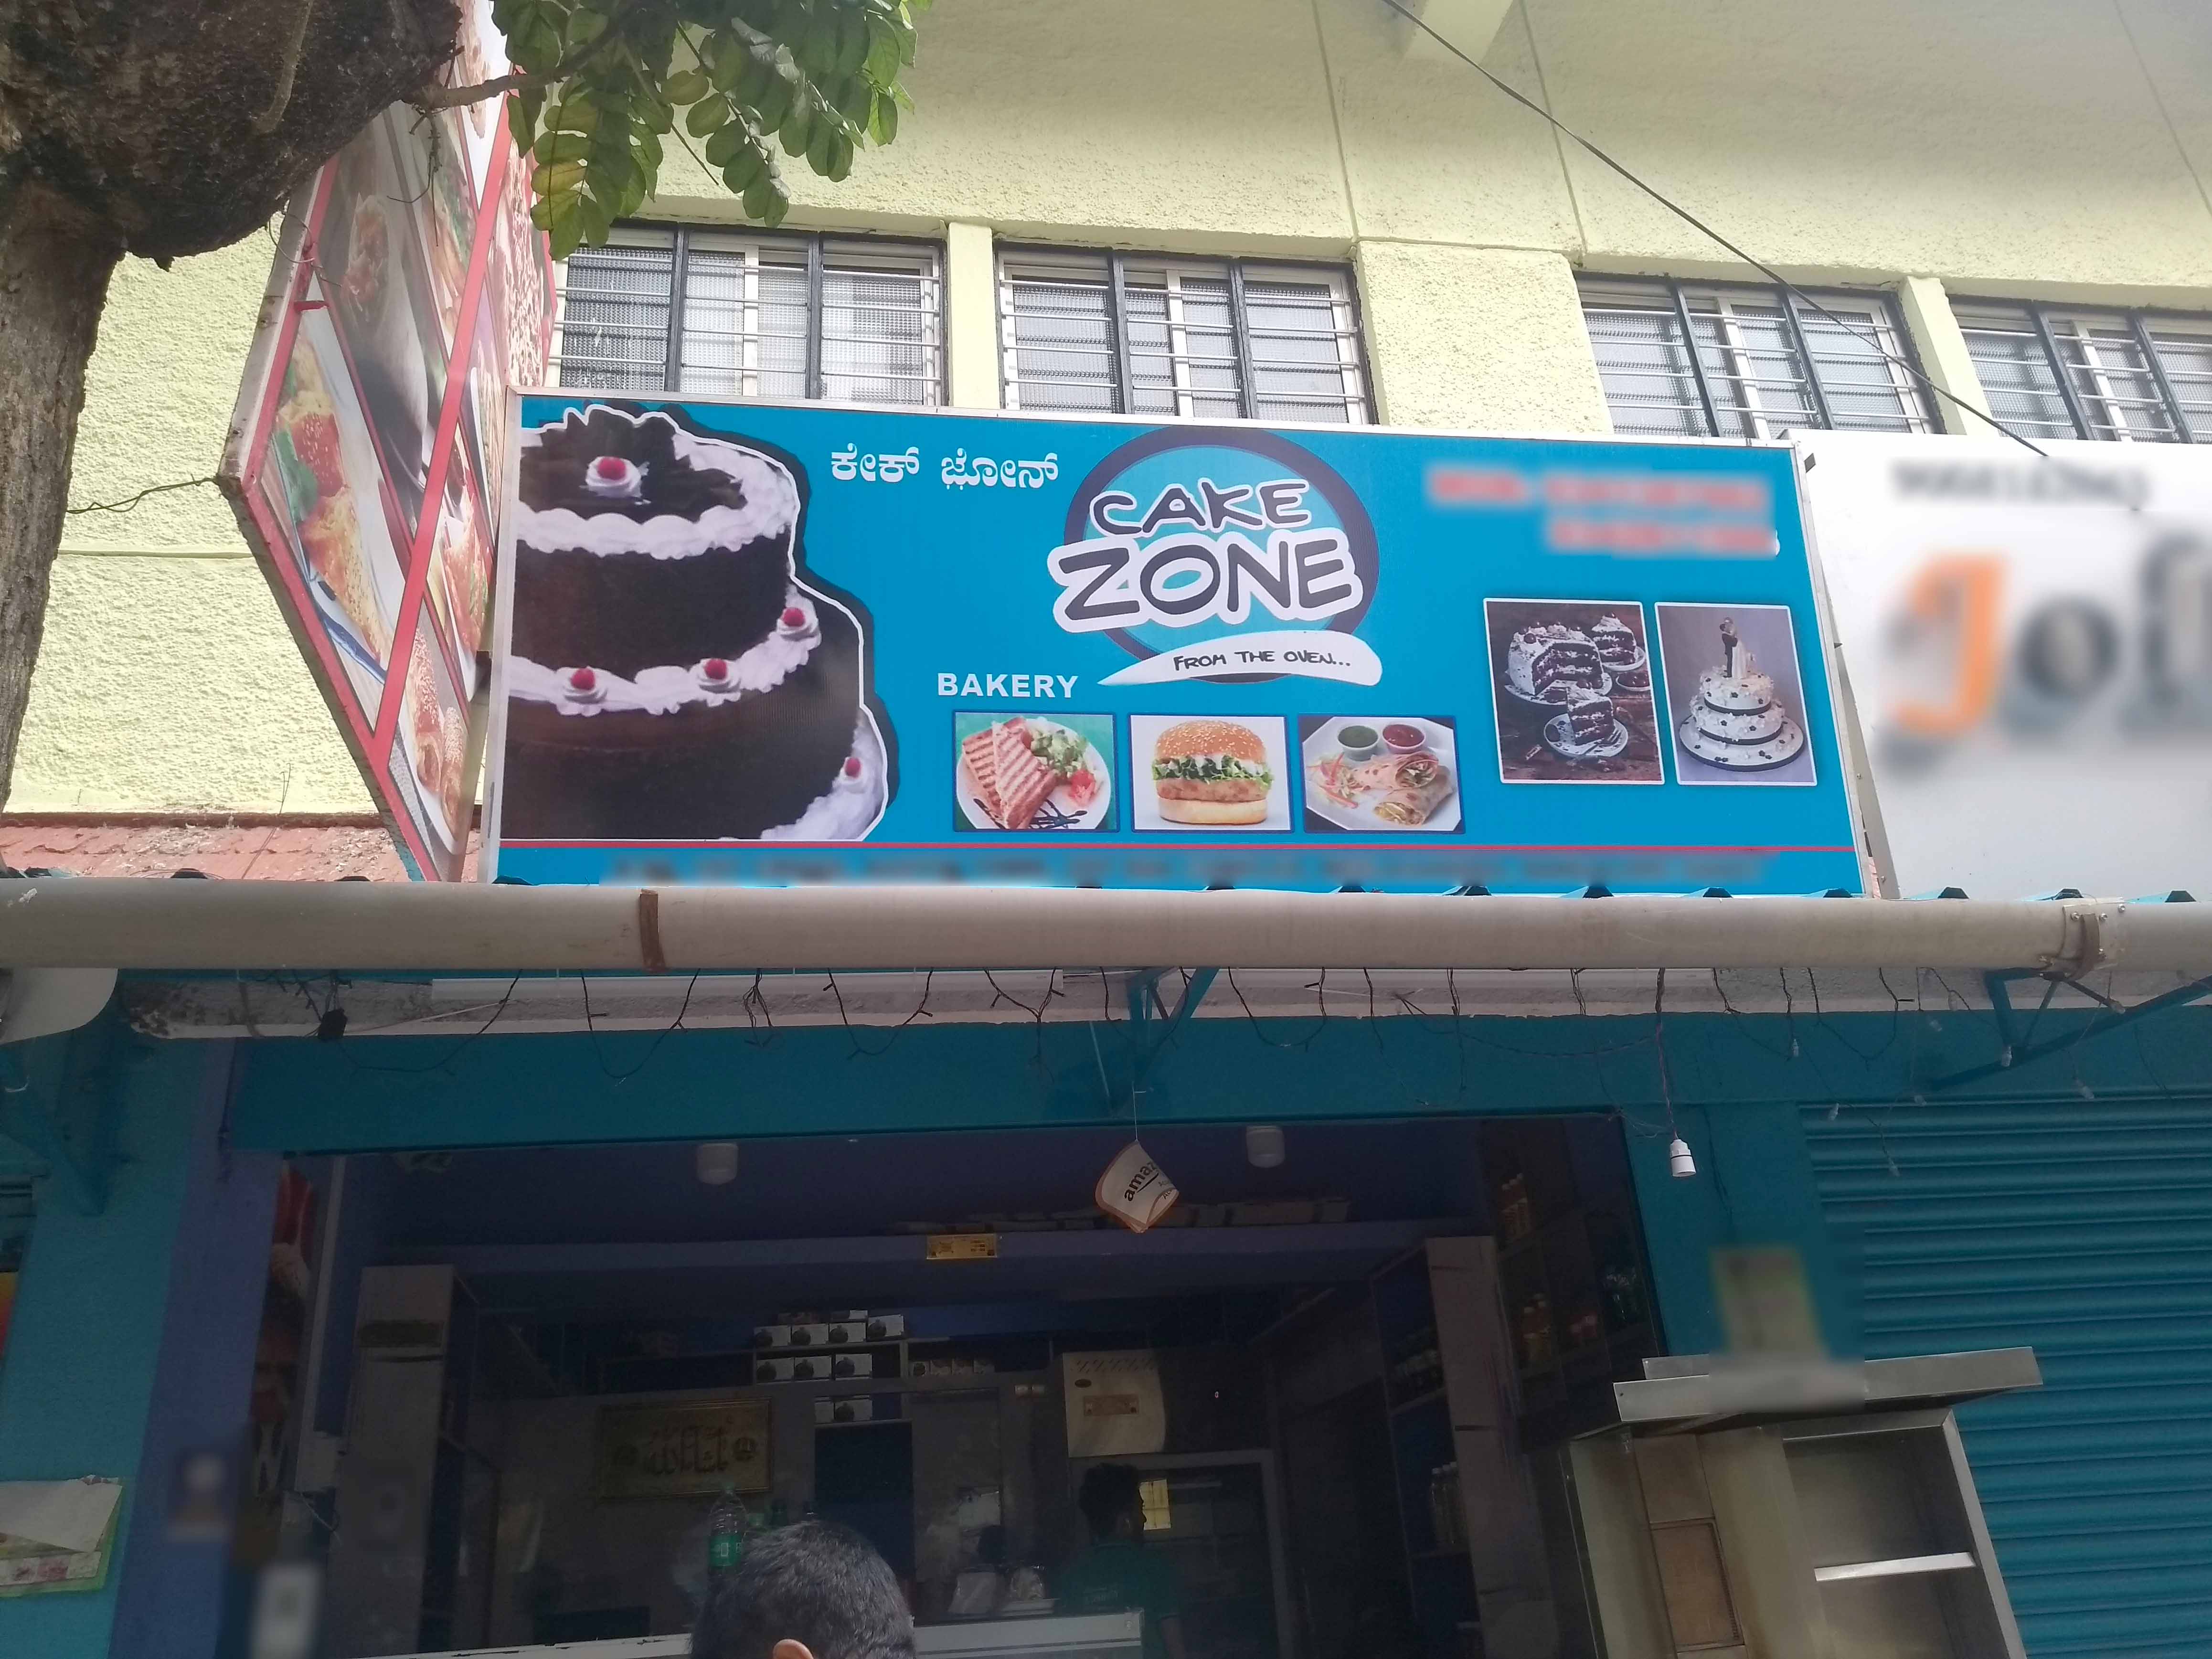 Find list of Cakezone in Malleswaram, Bangalore - Justdial